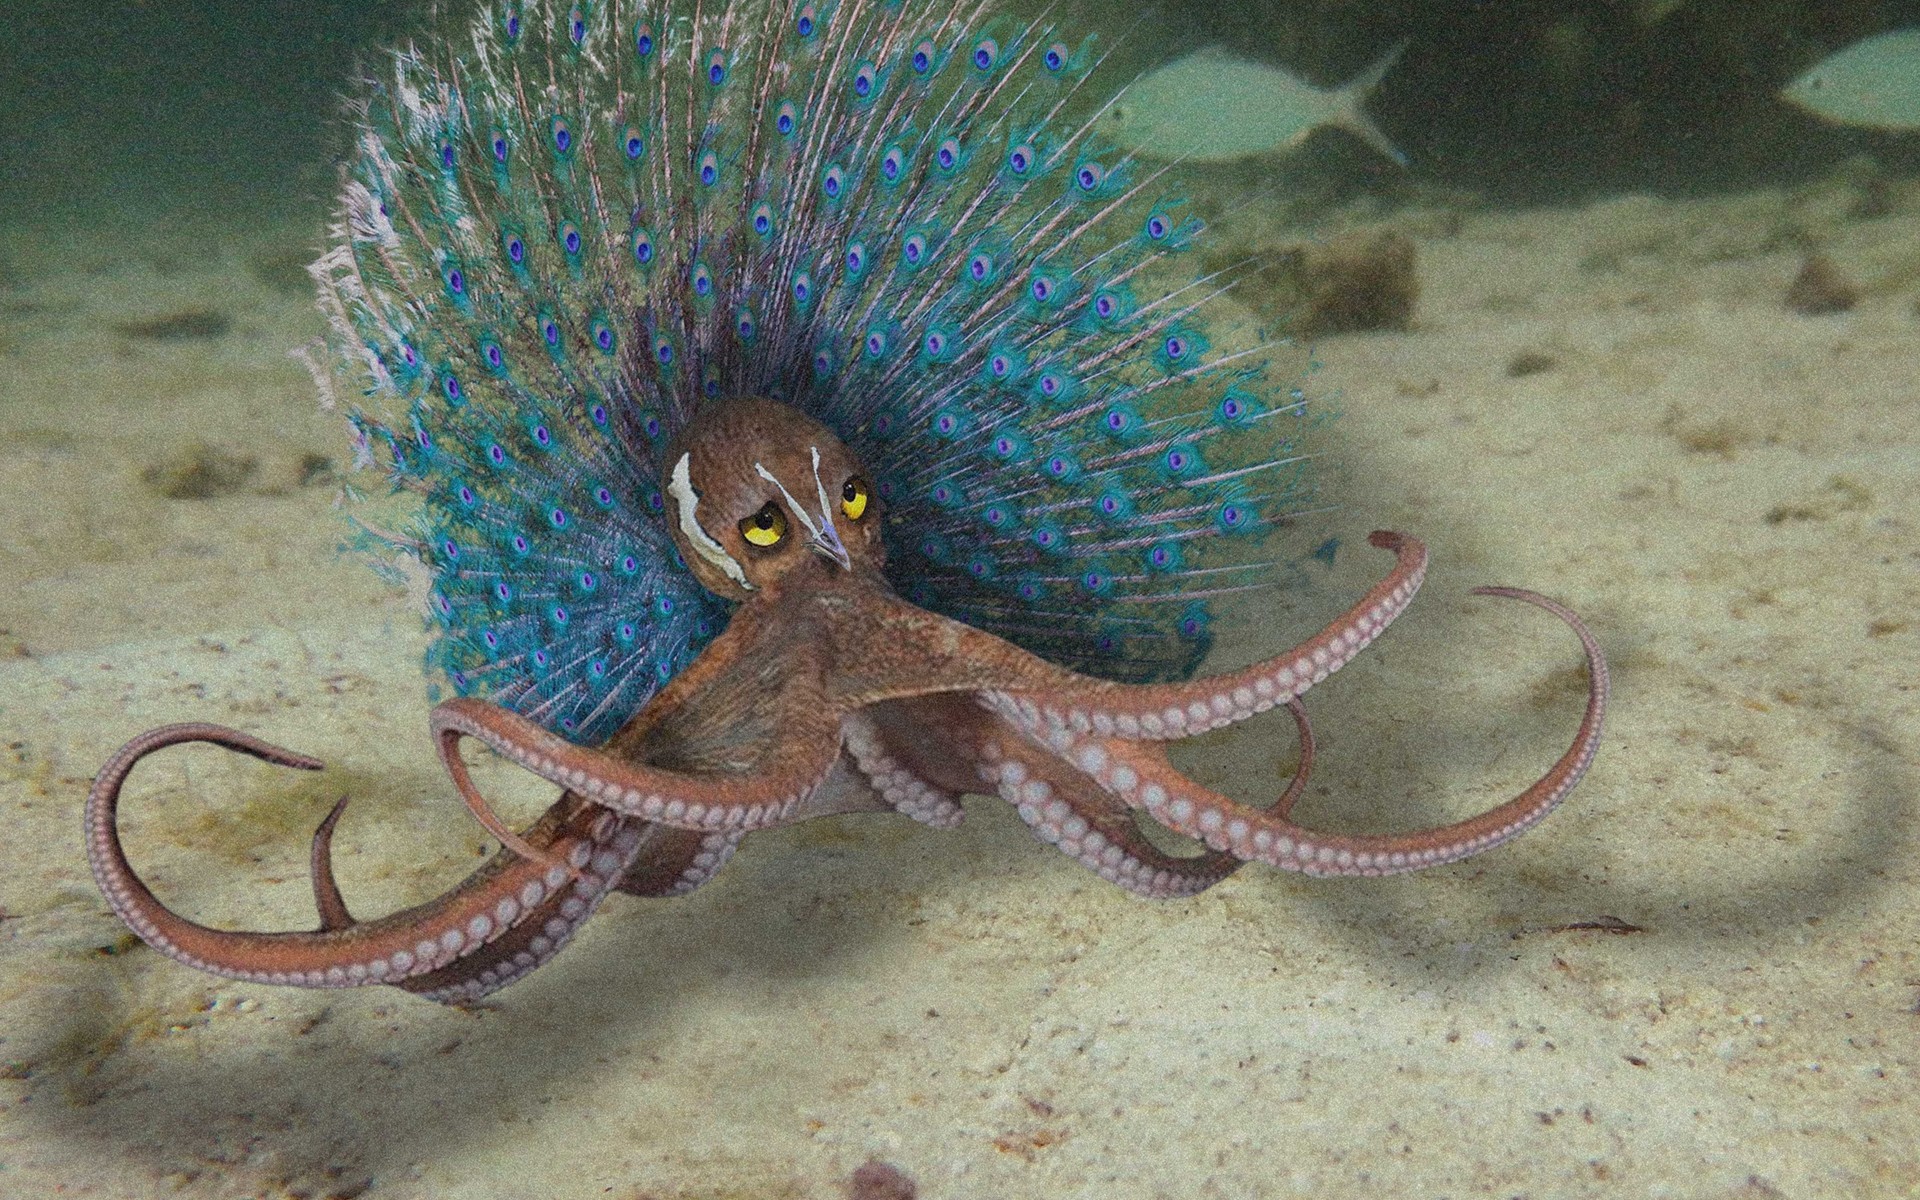 Octocock